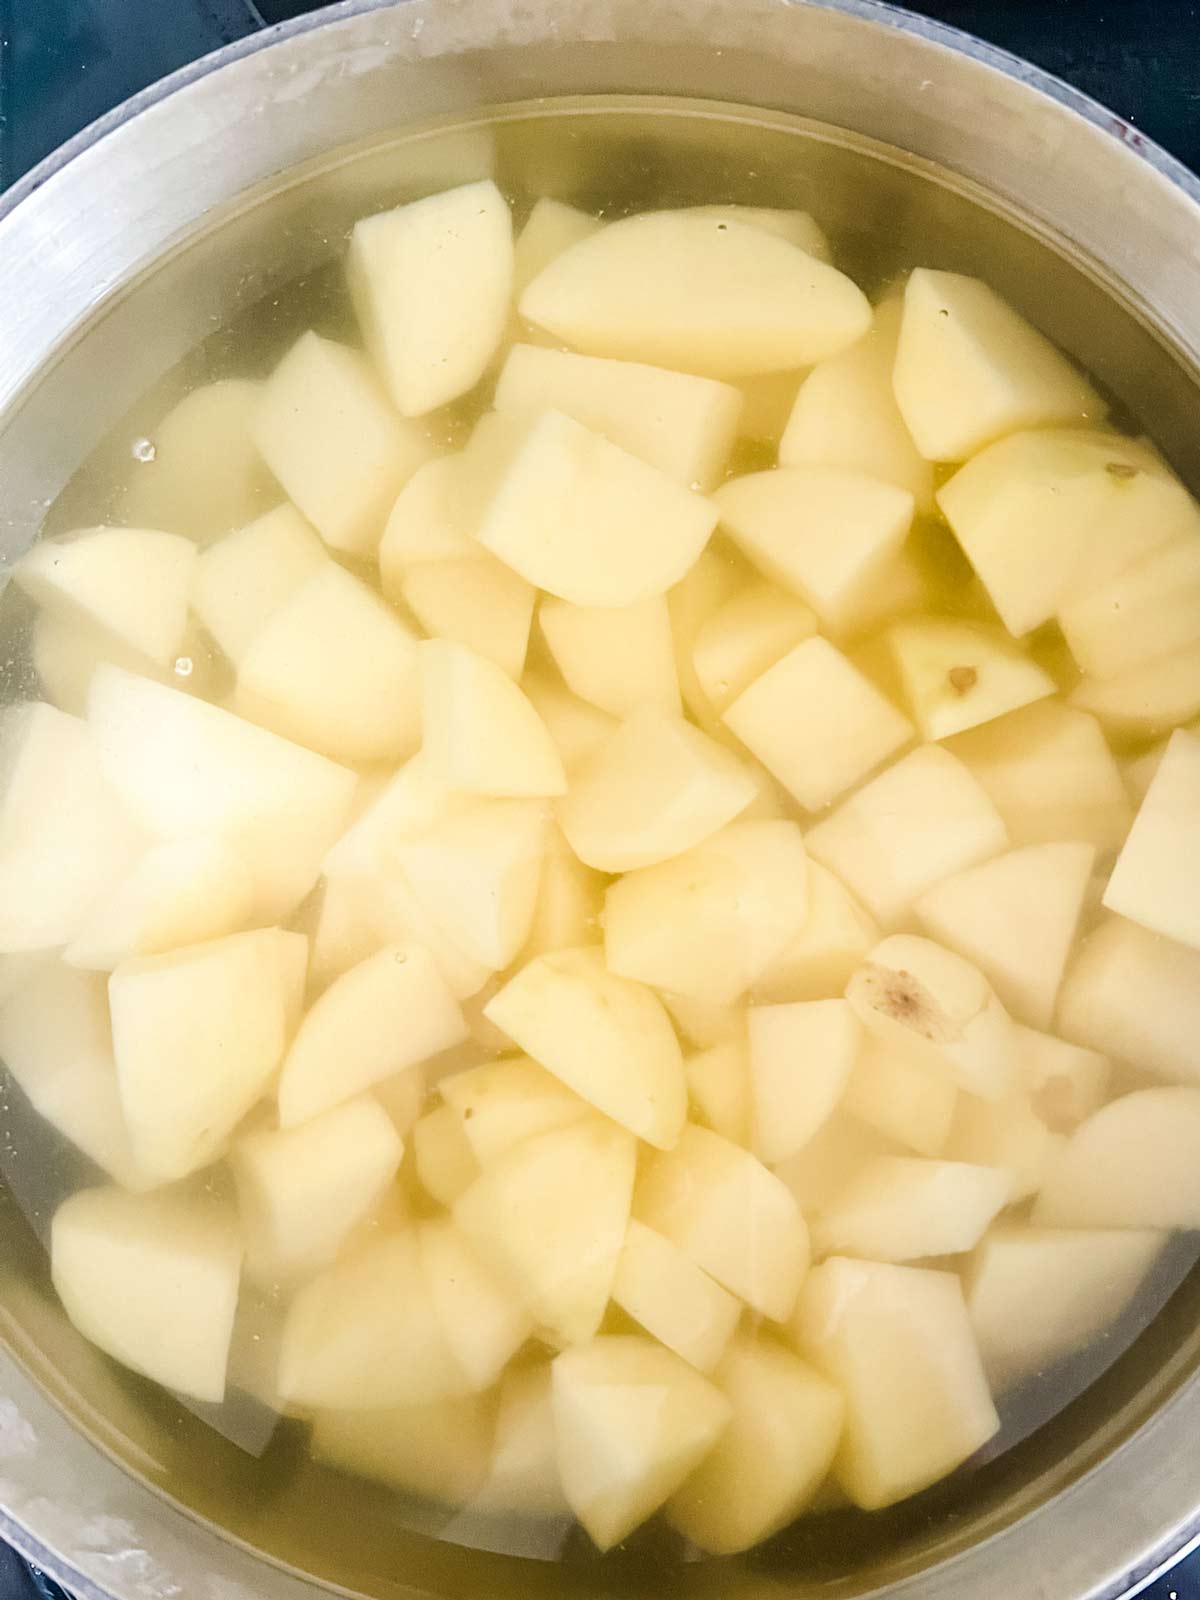 Diced potatoes being brought to a boil.